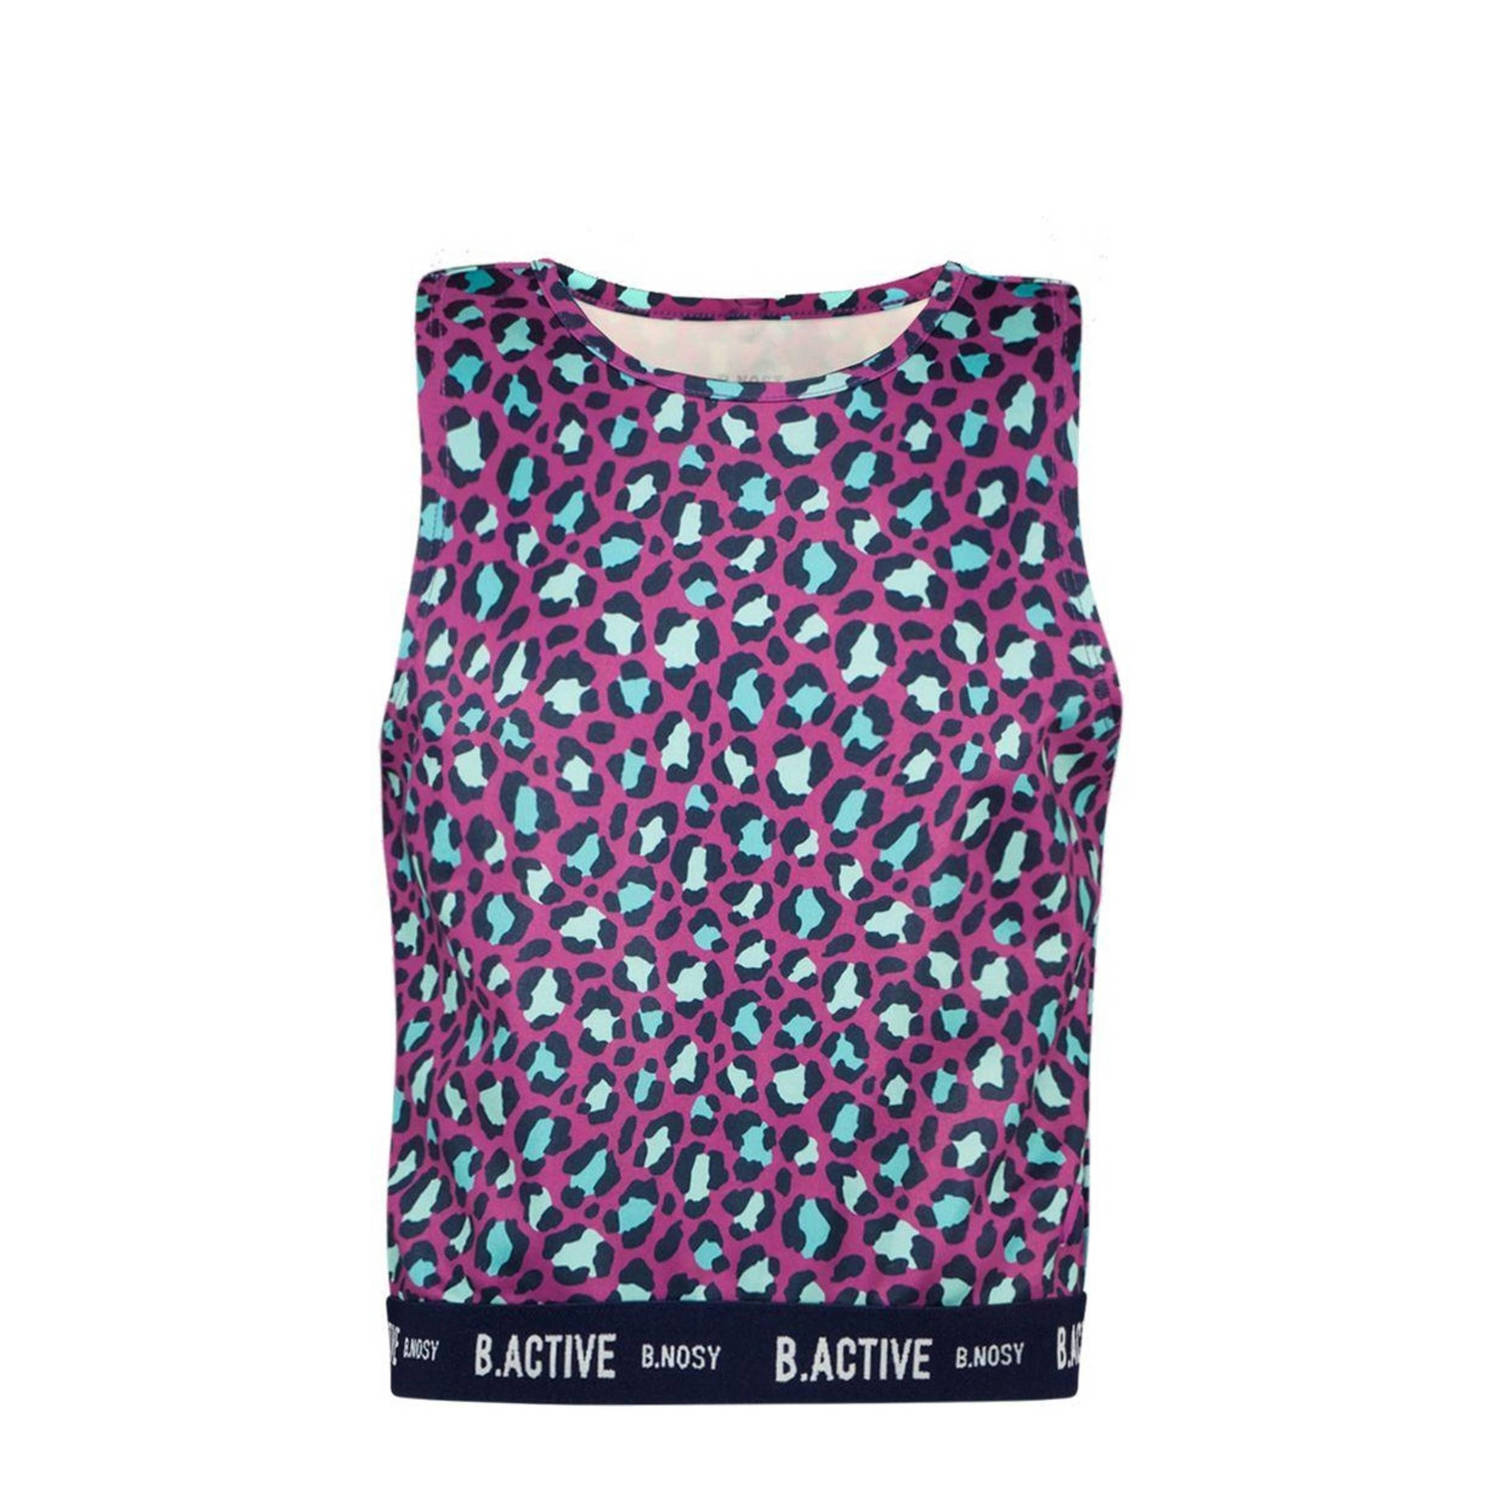 B.Nosy tanktop Amy paars aqua donkerblauw Sporttop Meisjes Gerecycled polyester Ronde hals 104